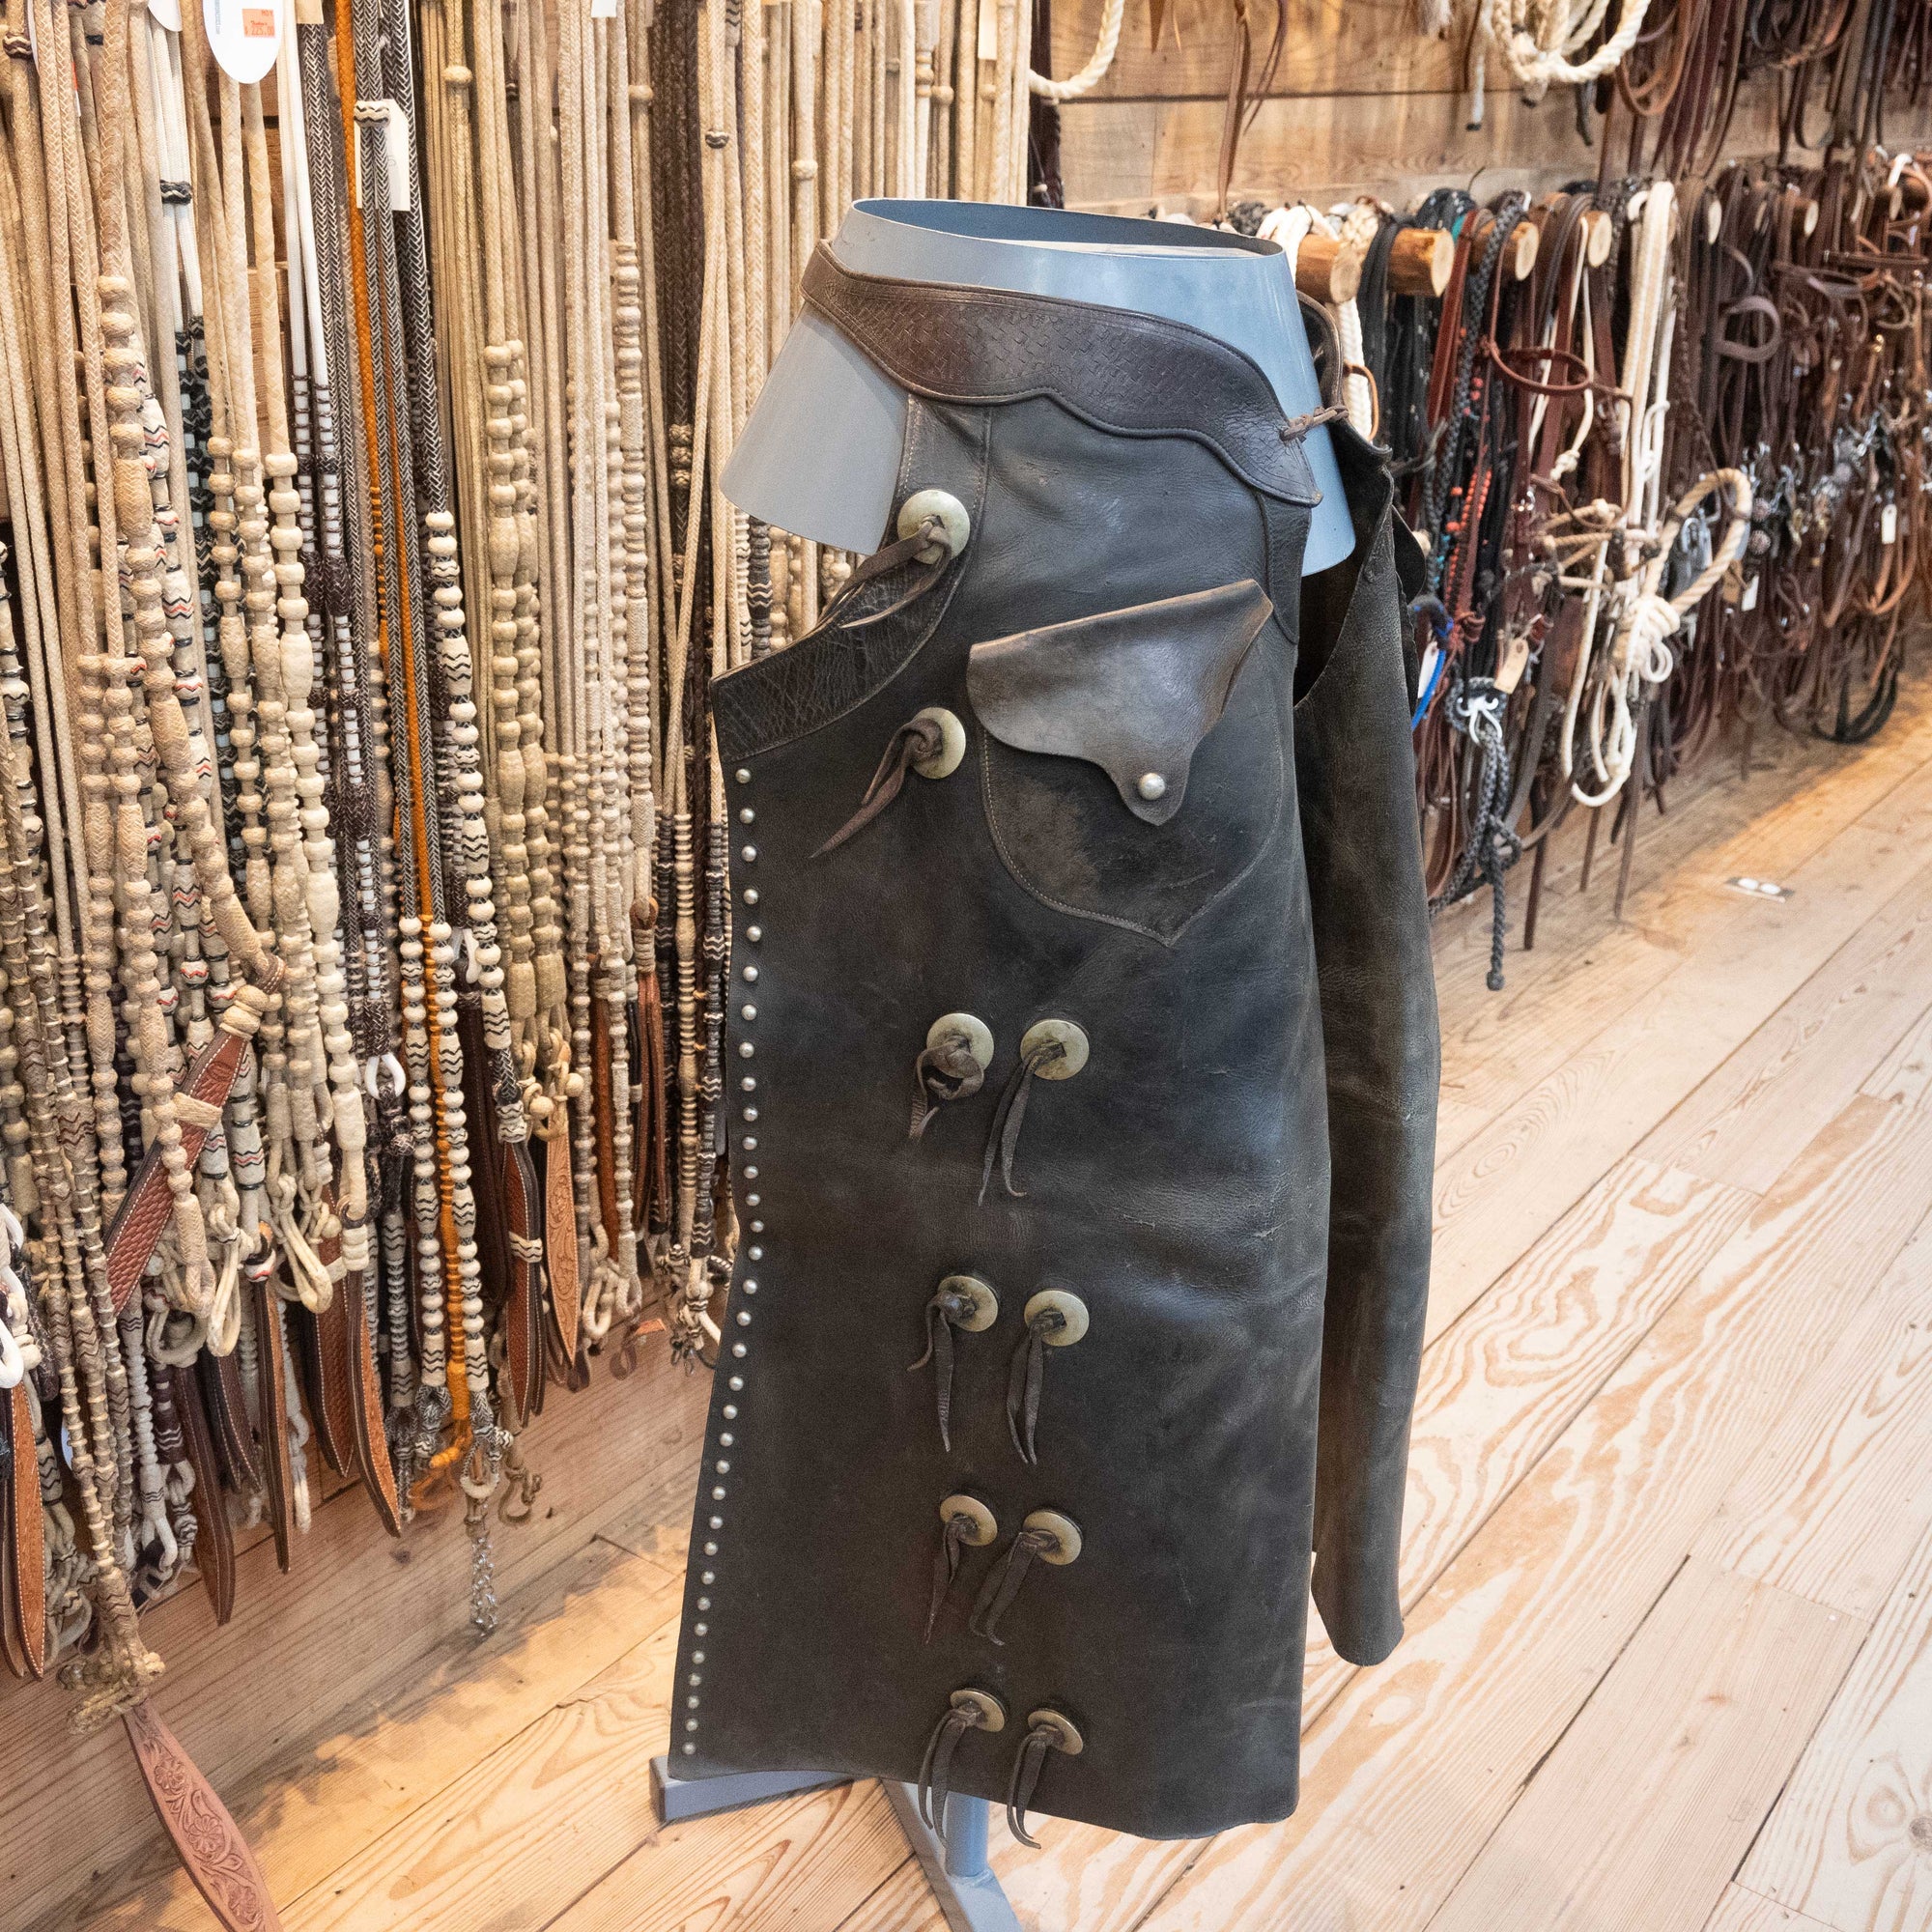 Cowboy Chaps - Handmade Vintage Leather Chaps CHAP767 Tack - Chaps & Chinks MISC   